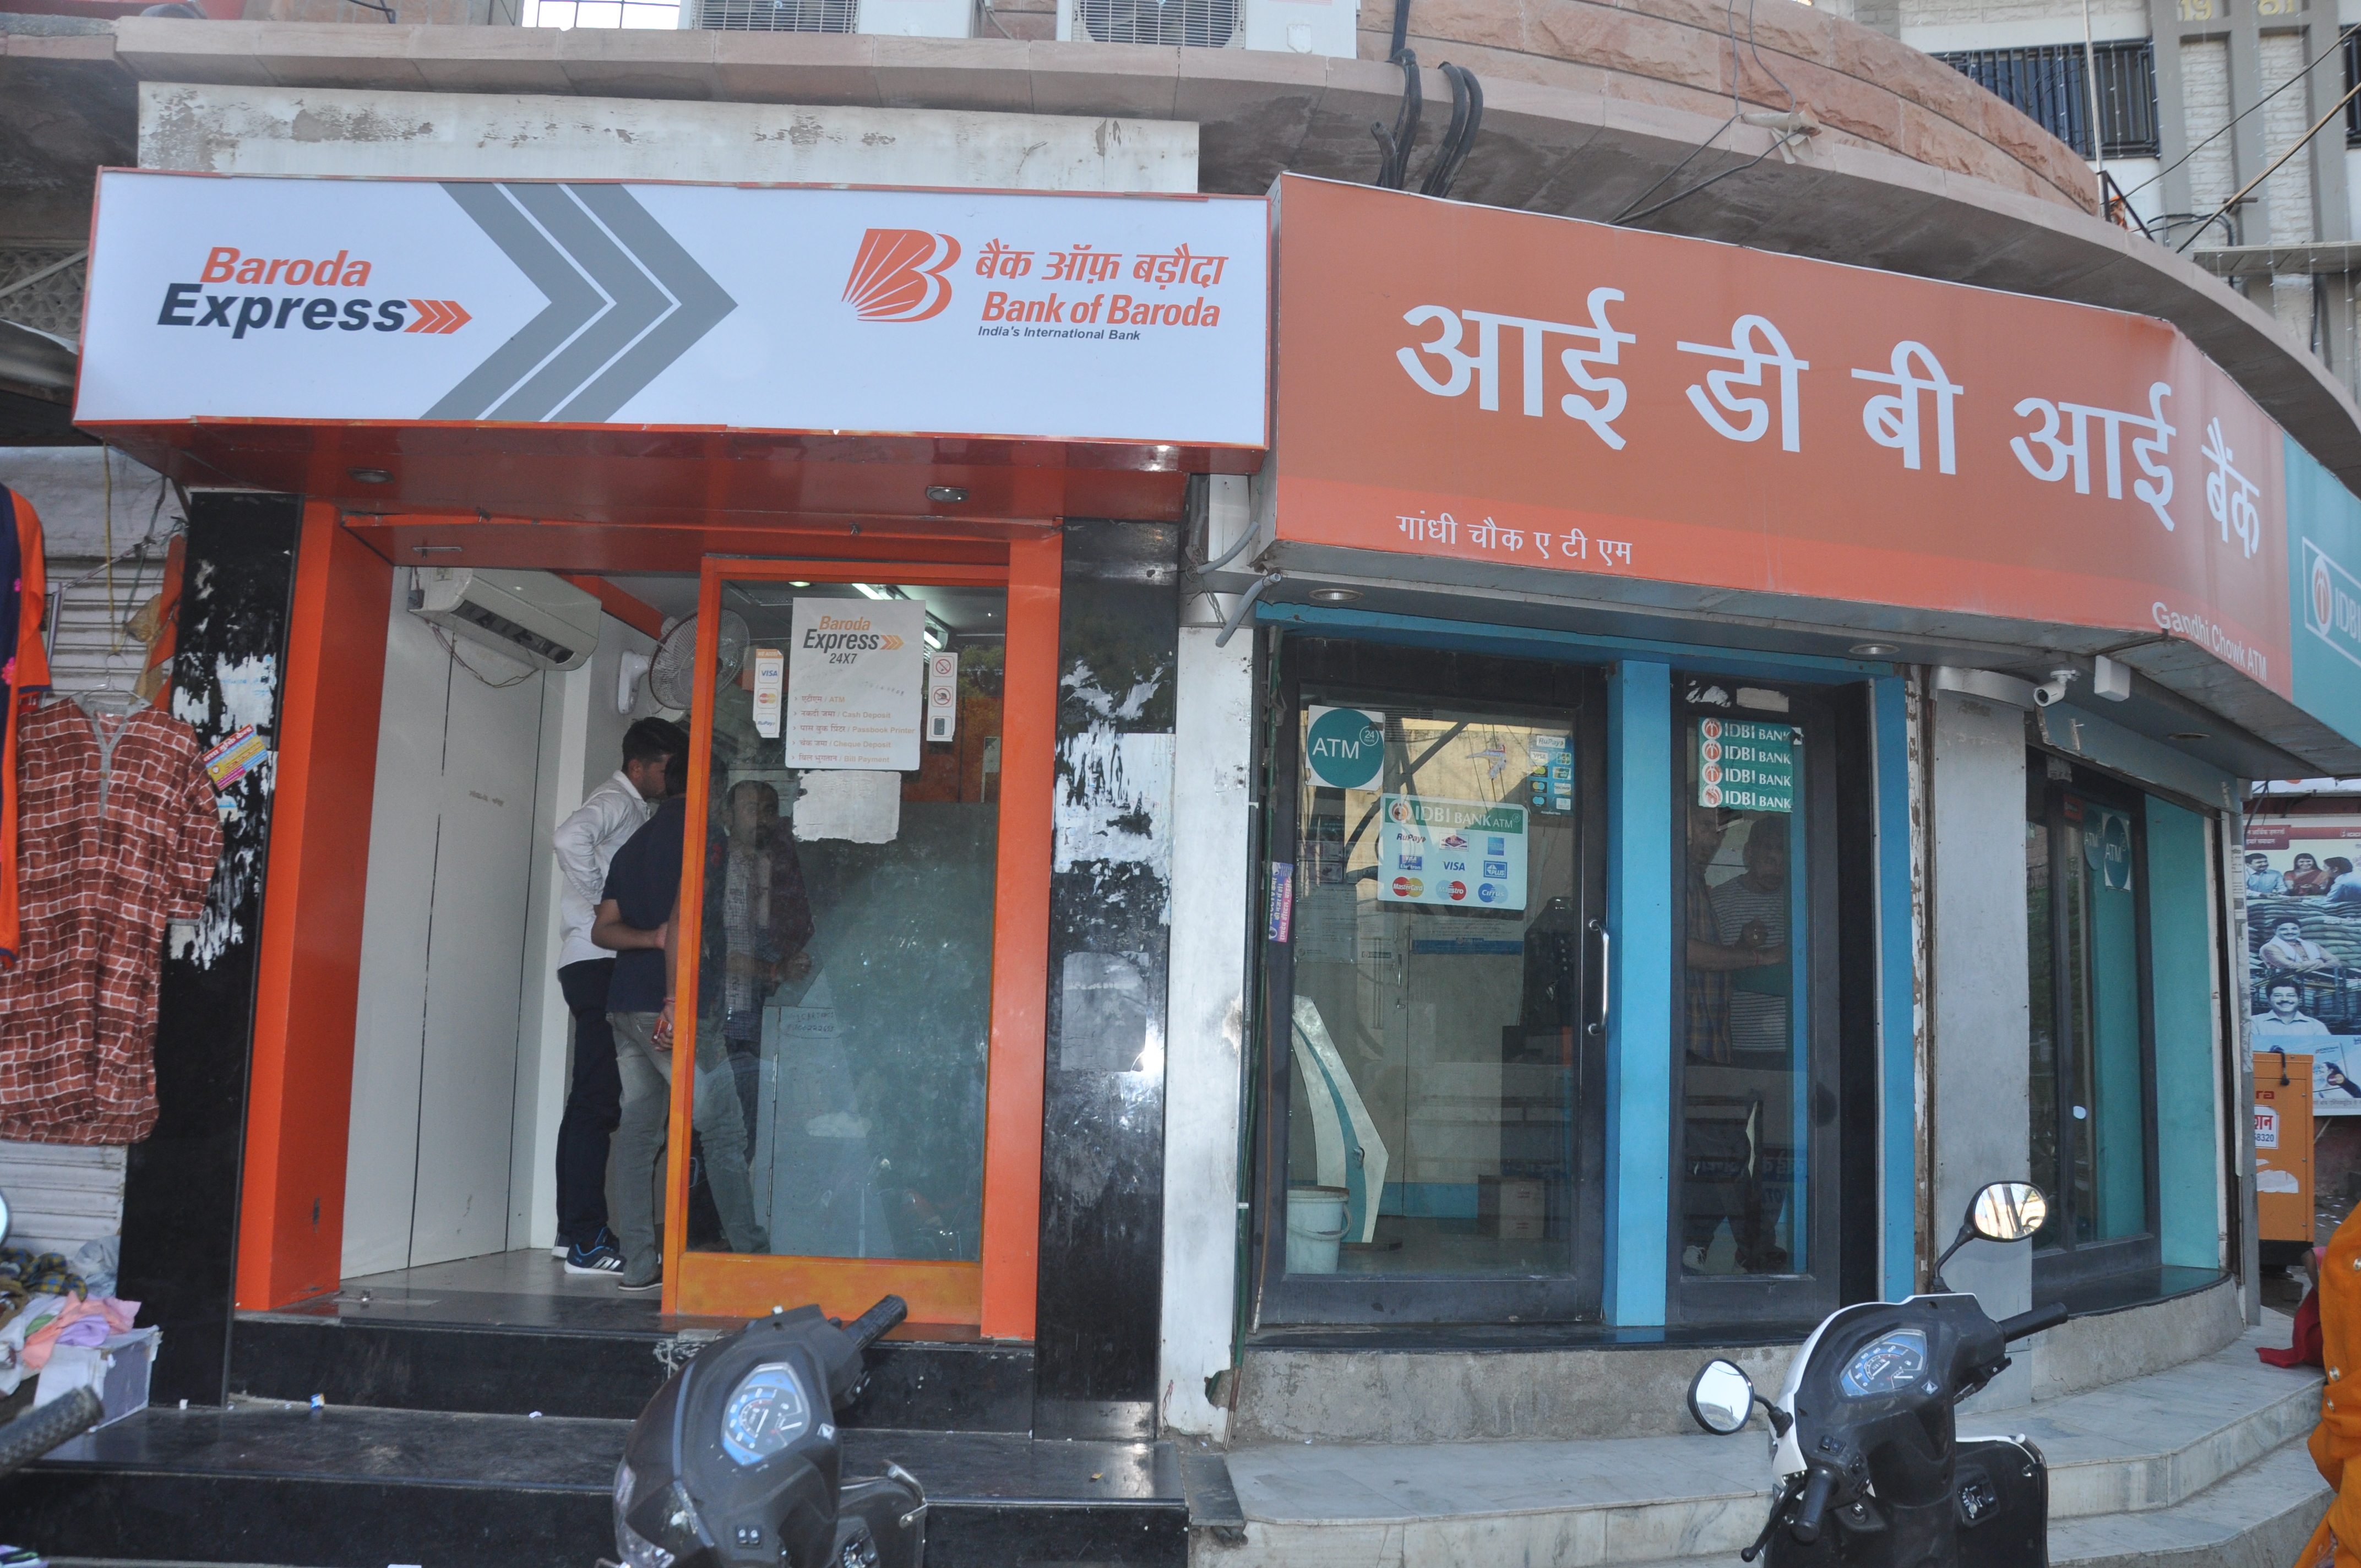 More than half ATMs in city are empty